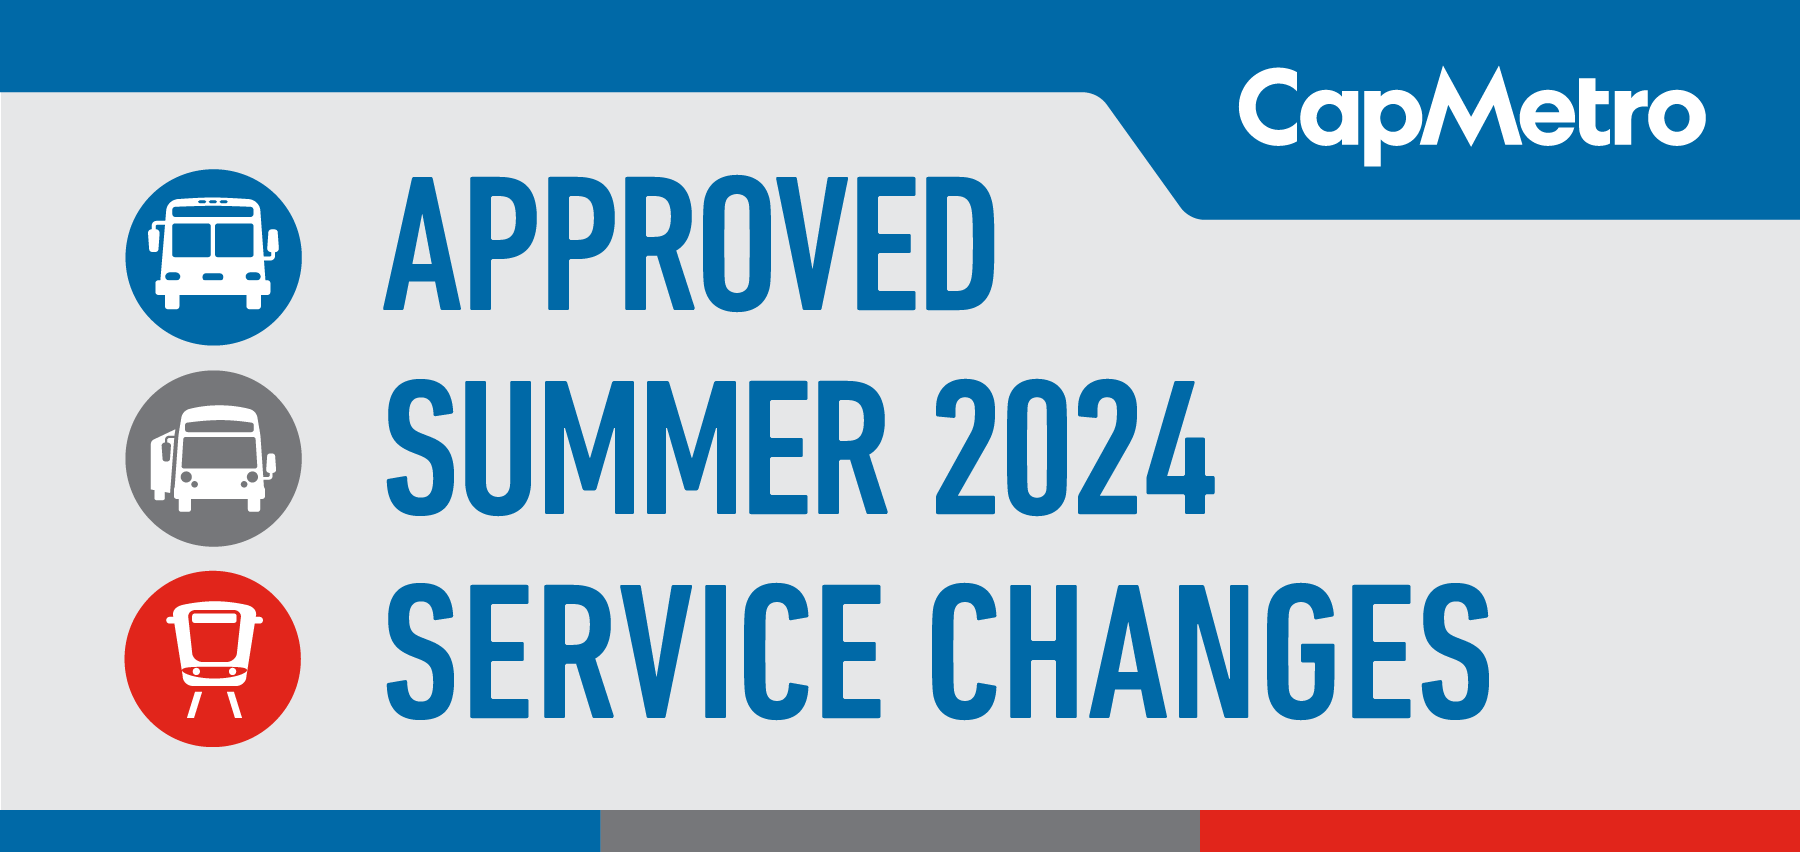 Approved summer service changes graphic